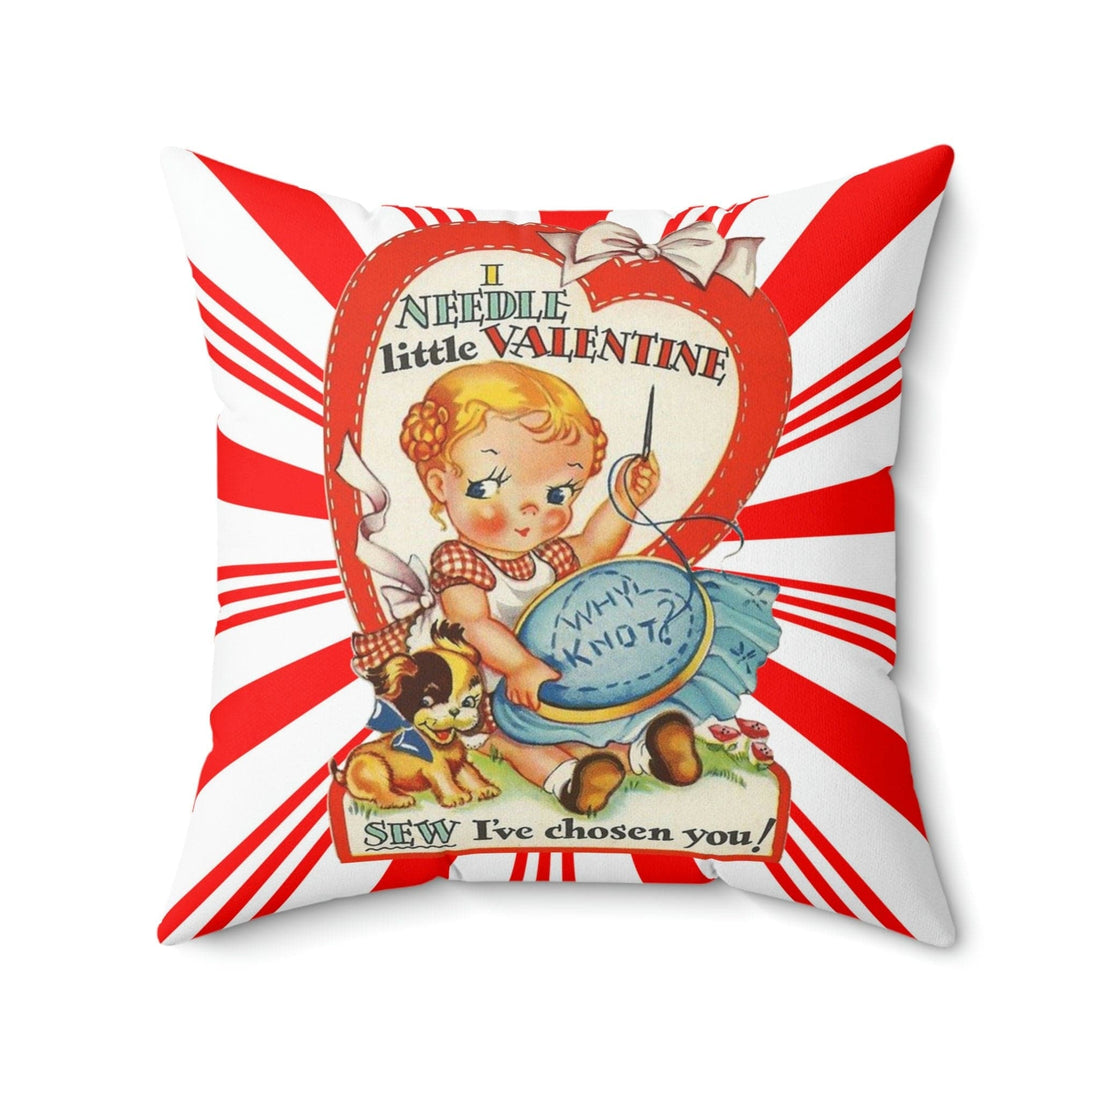 Kate McEnroe New York Vintage Retro Funny Sewing Valentine Throw Pillow CoverThrow Pillow Covers31670065145464879072